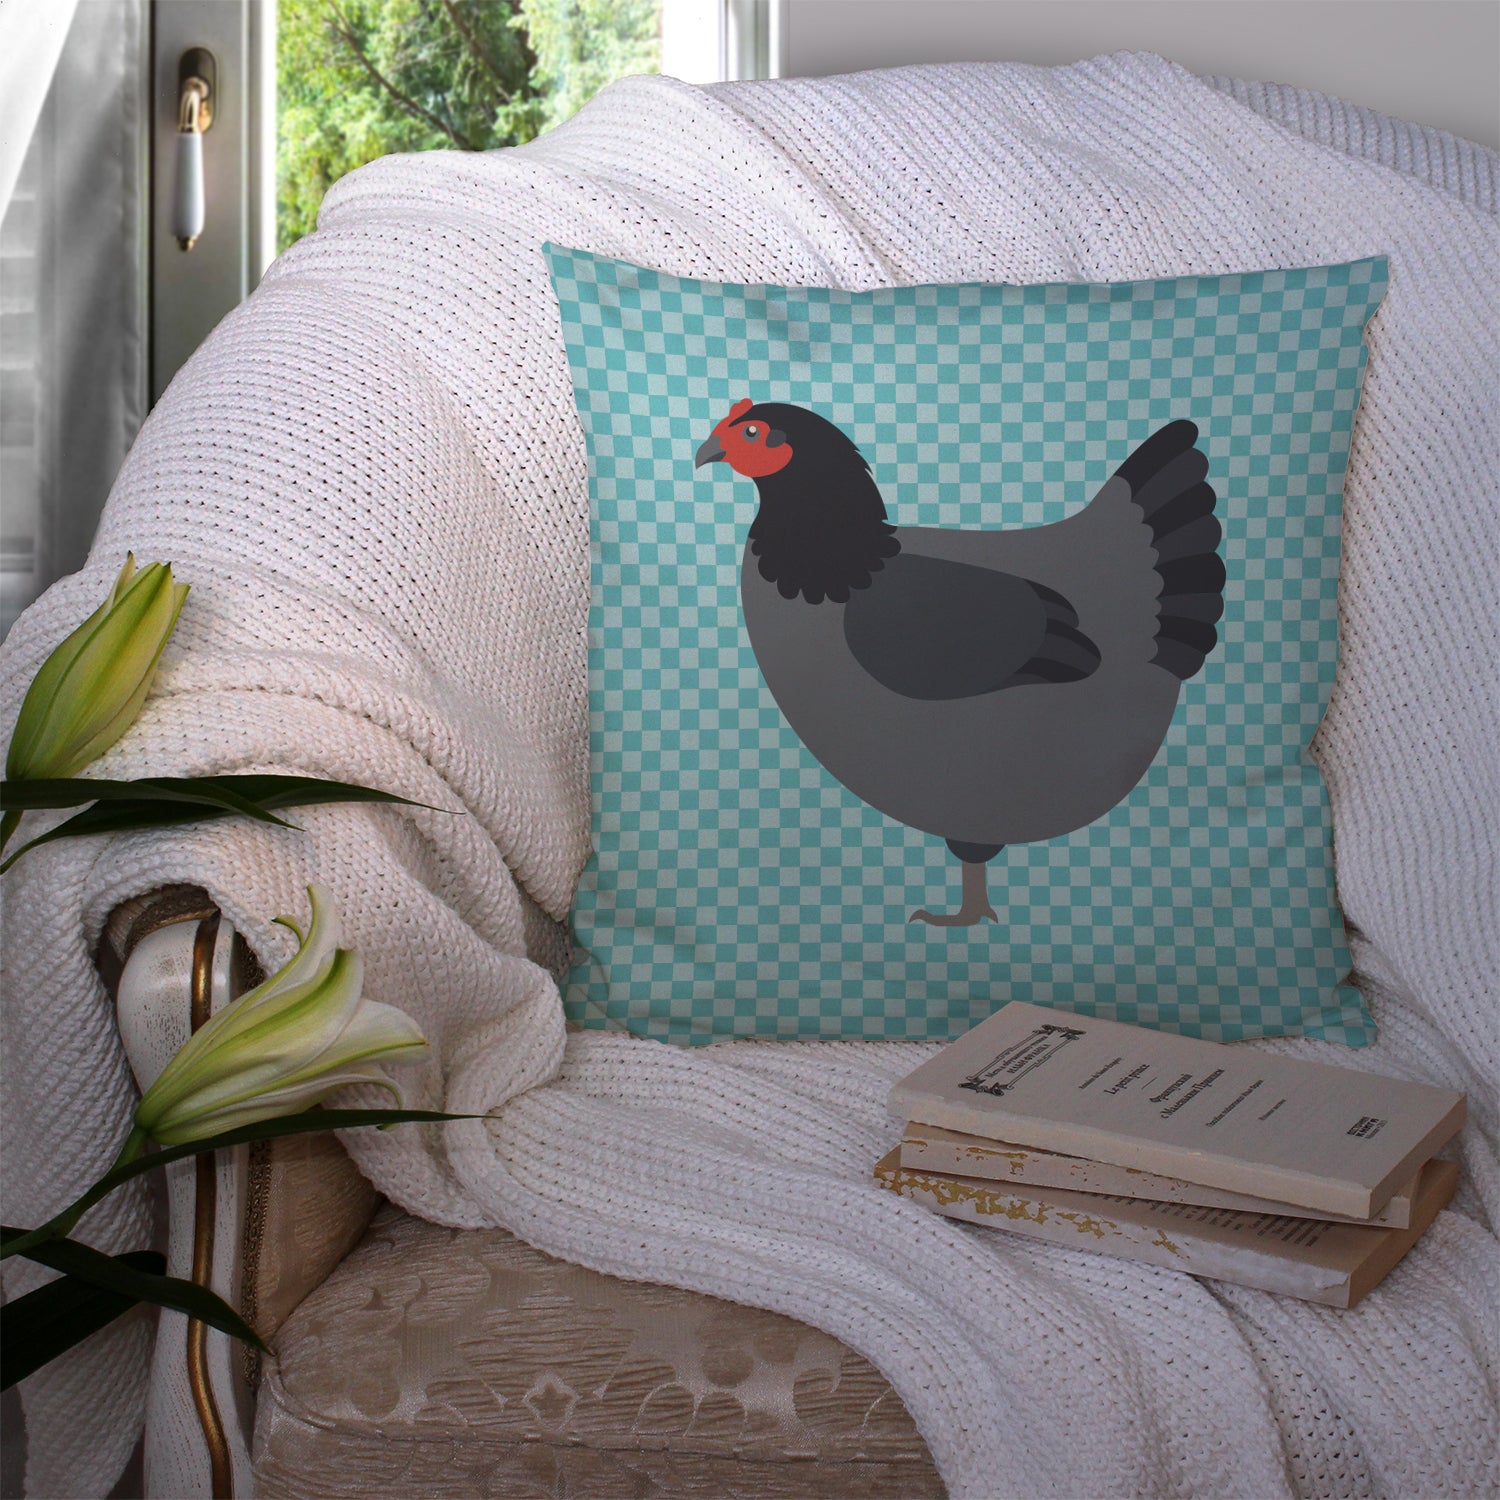 Jersey Giant Chicken Blue Check Fabric Decorative Pillow BB8009PW1414 - the-store.com